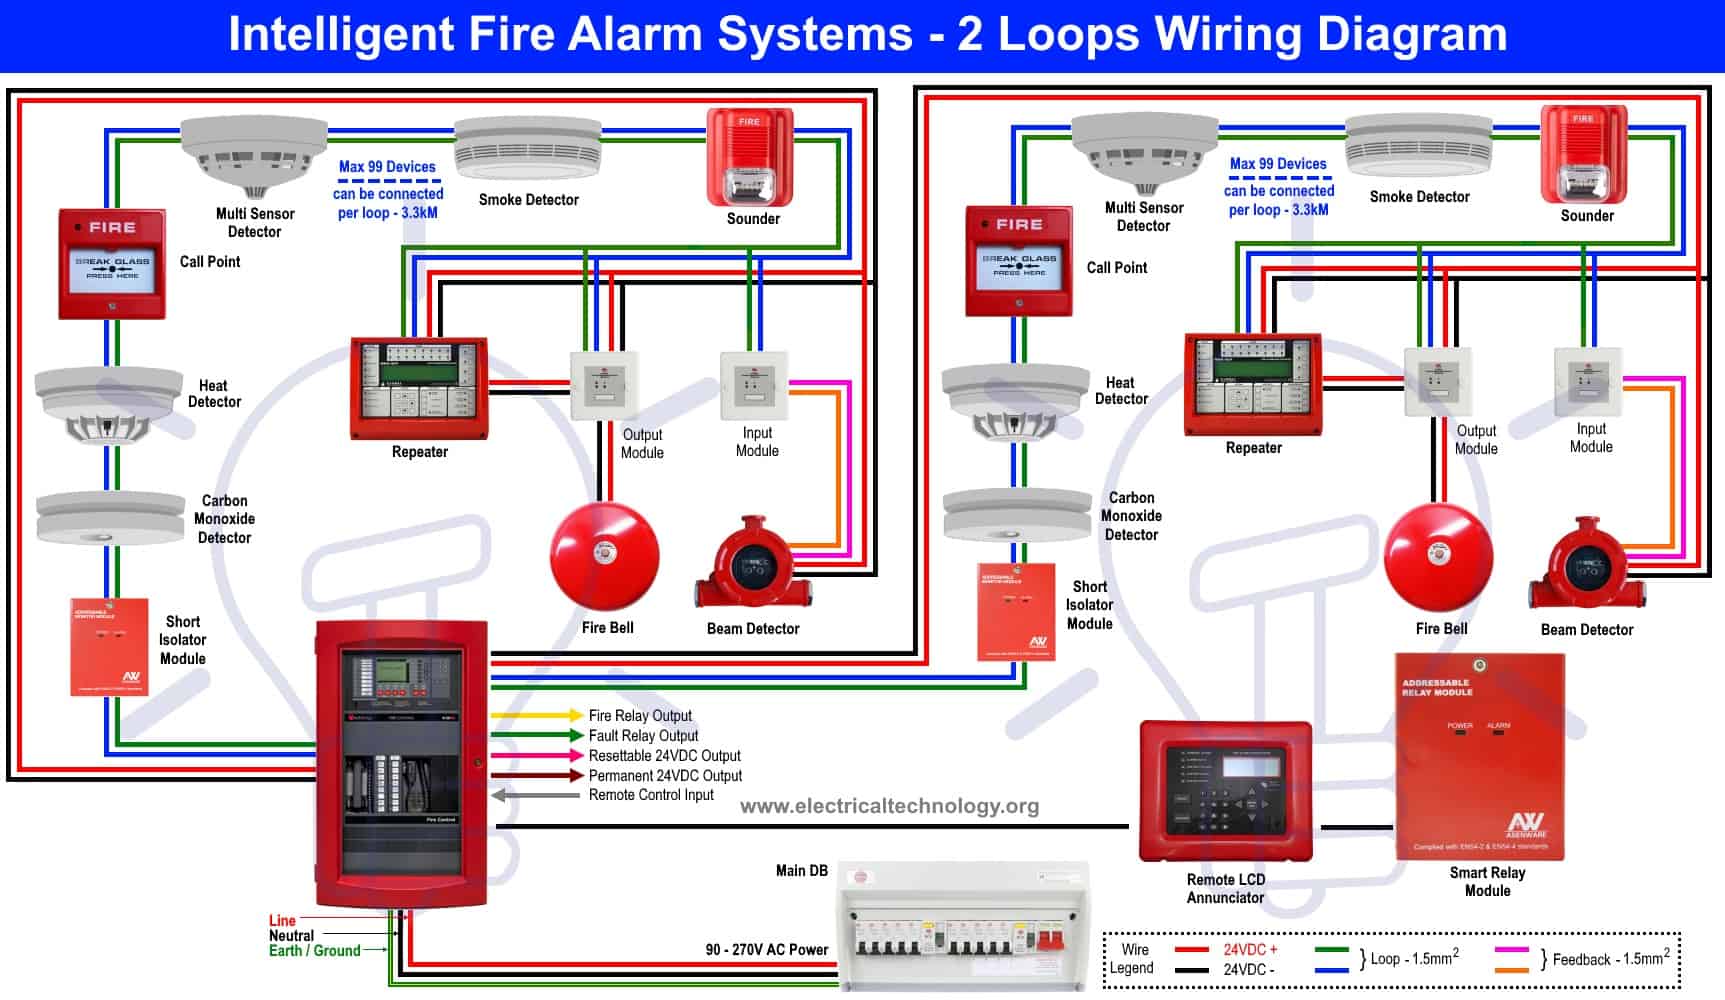 Intelligent Fire Alarm Systems - Two Loops Wiring Diagram